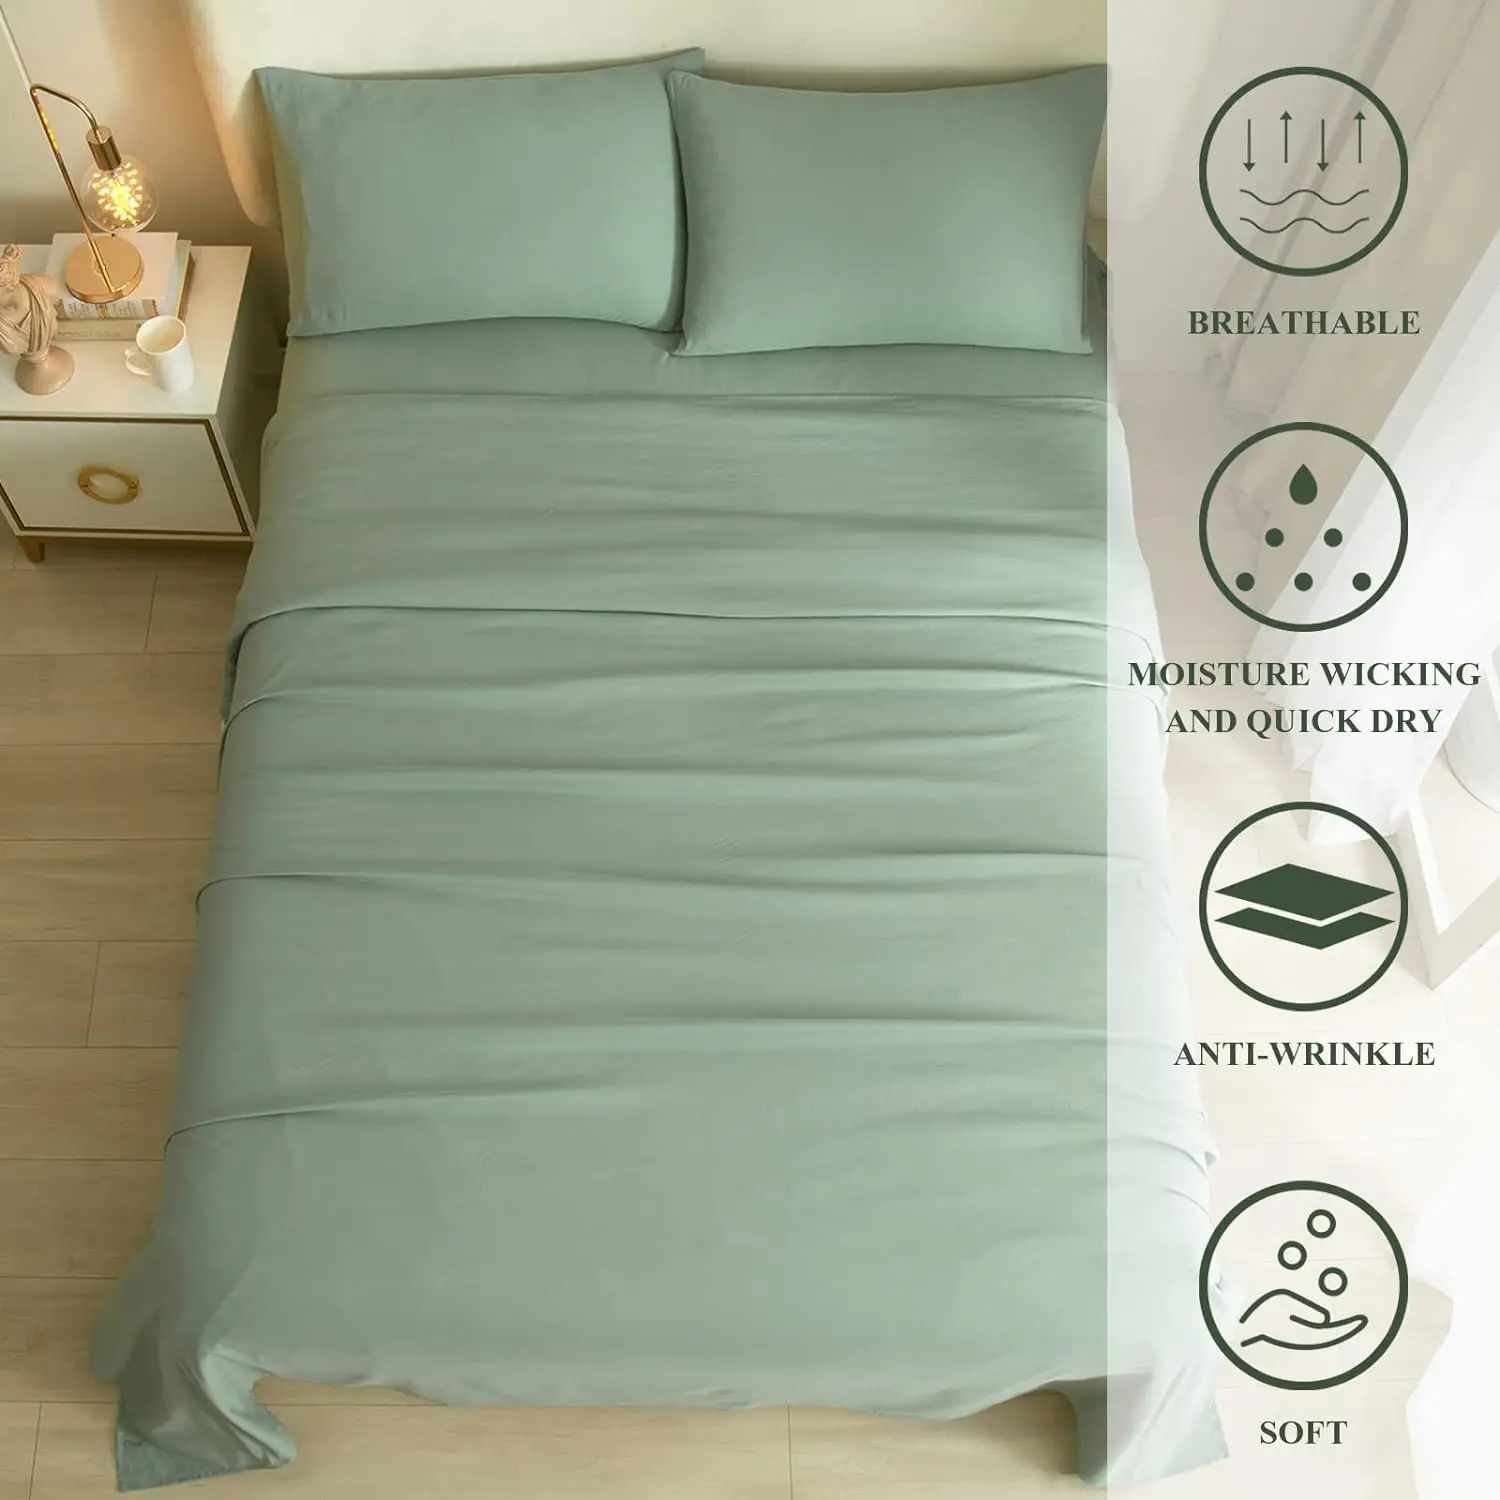 

HighBuy Full Size Sheet Sets Sage Green - 4 Piece Bed Sheets and Pillowcase Set for Full Bed Mattress - Cooling Sheets Soft Deep